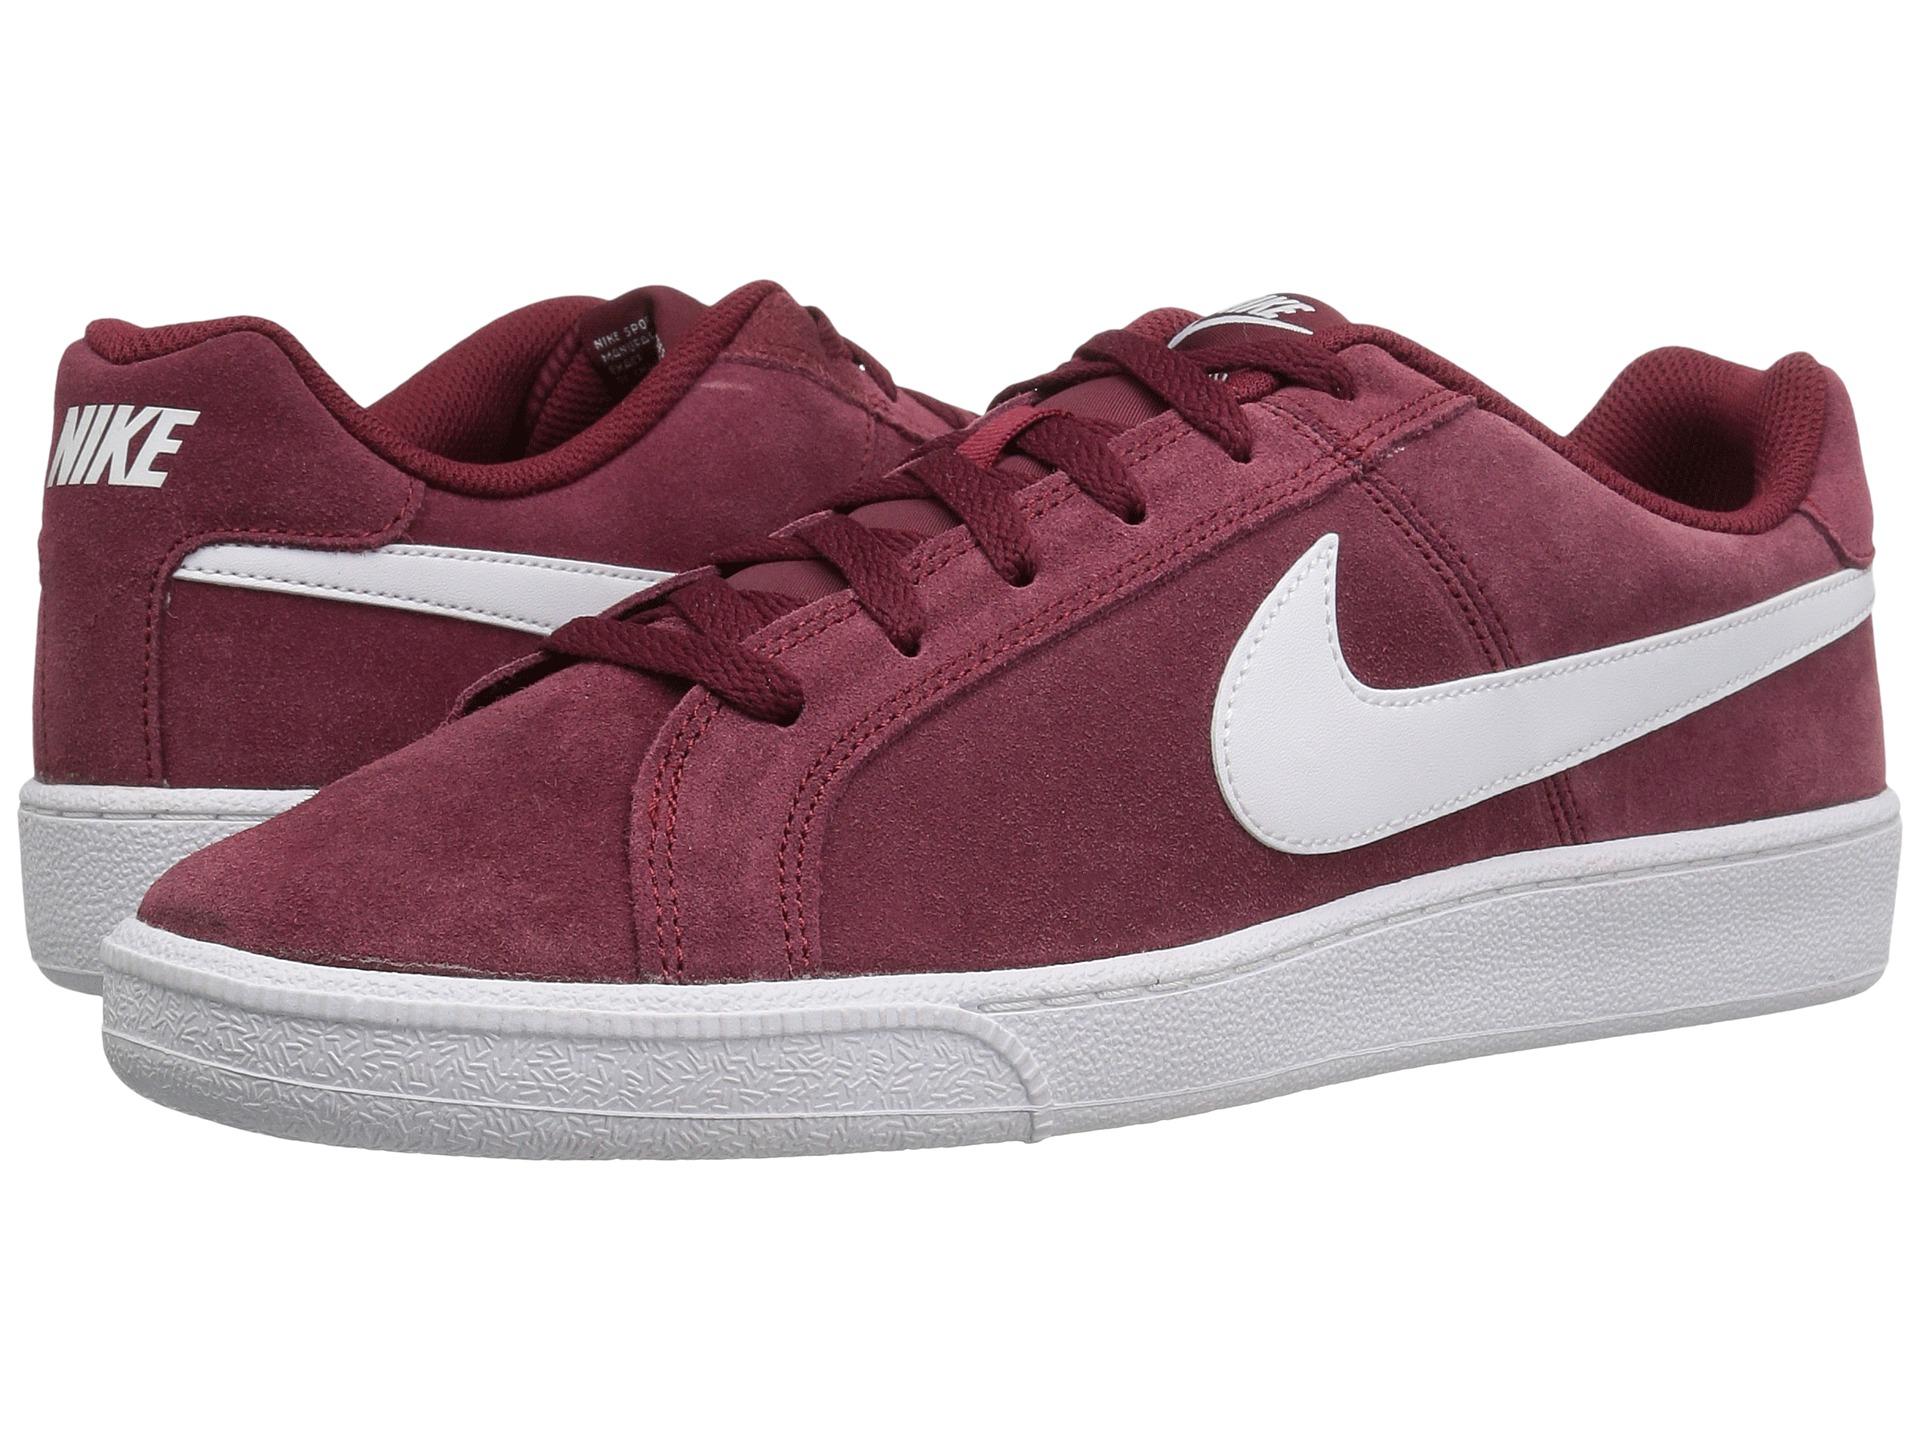 Nike Court Royale Suede in Red for Men - Lyst